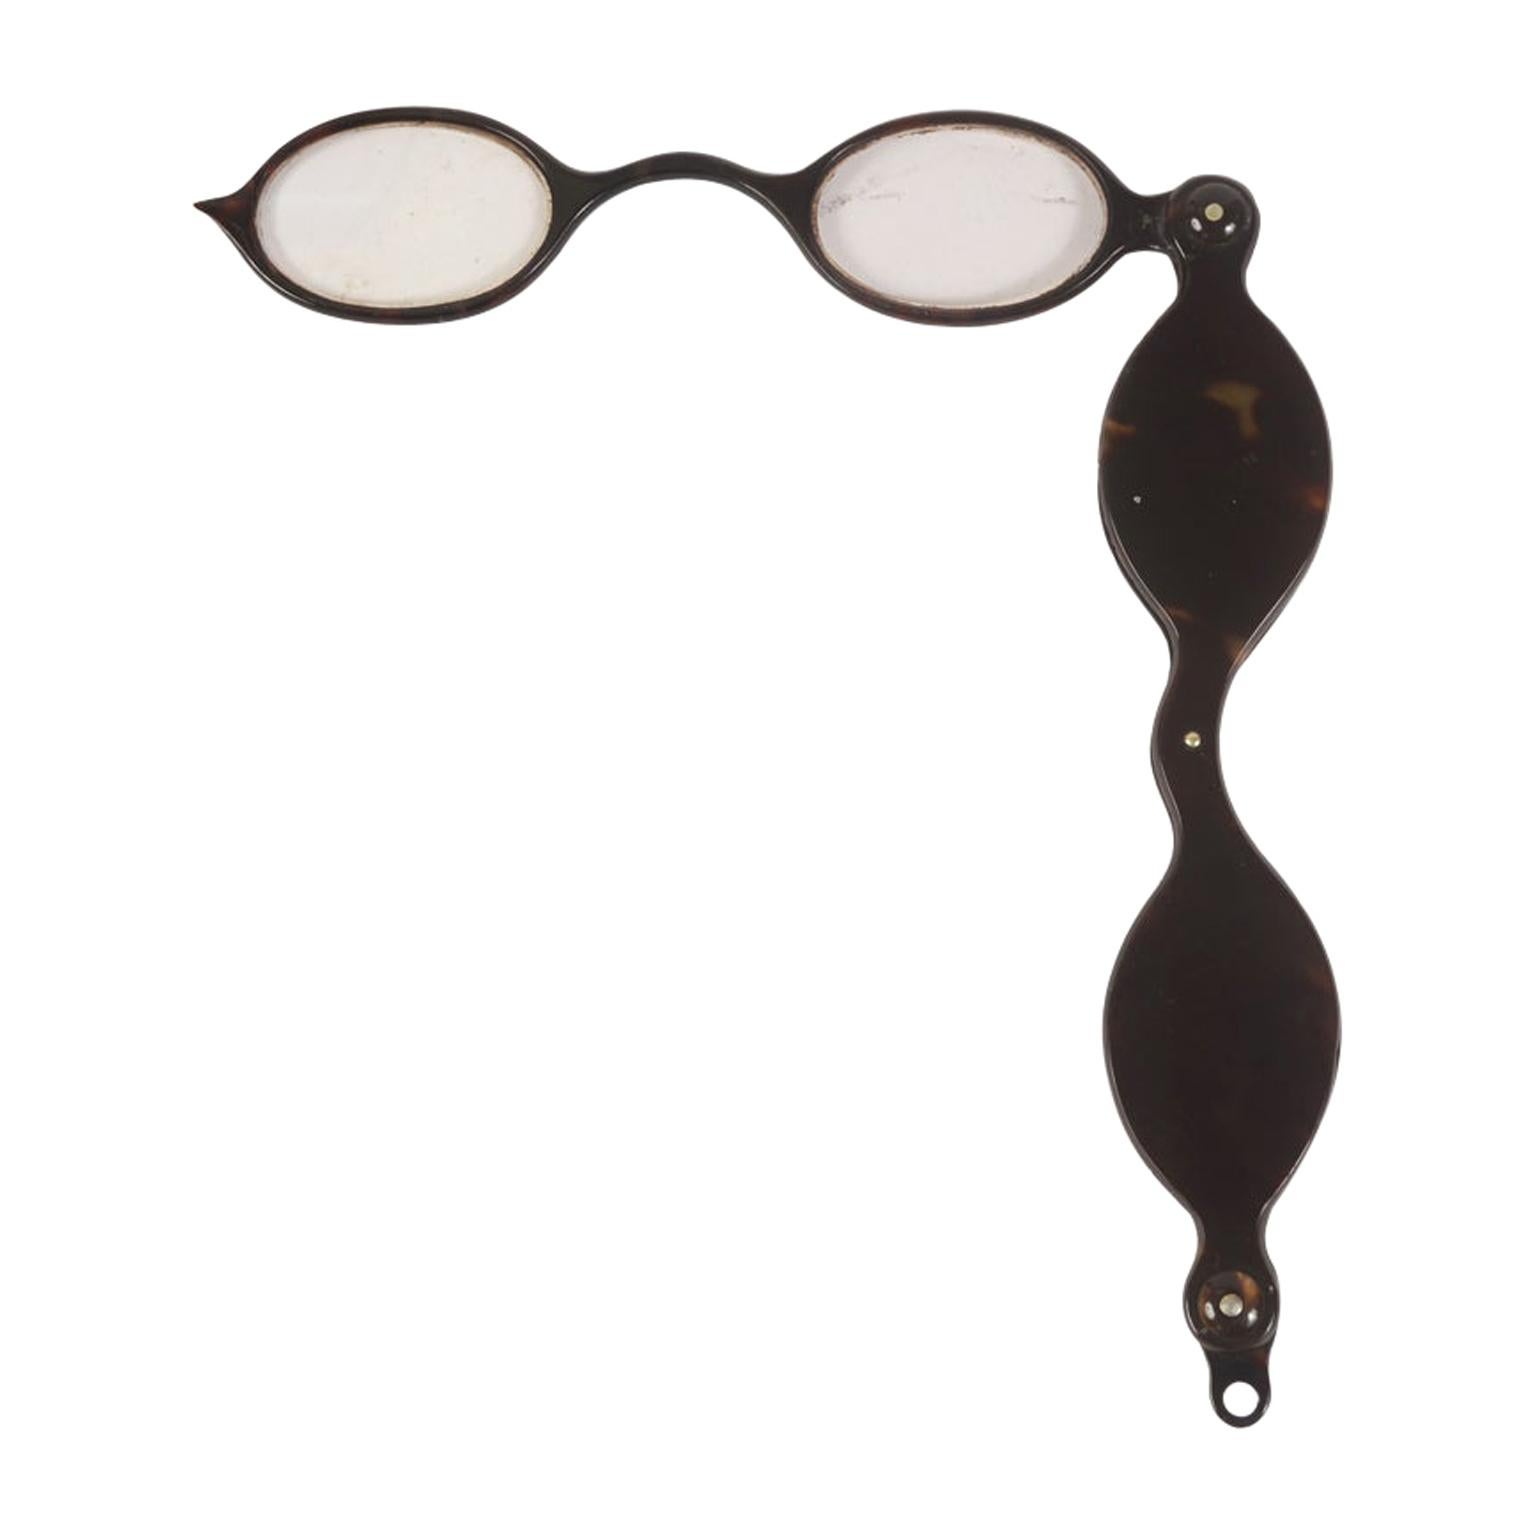 Fassamano French Tortoise Antique Eyeglasses Second Half  19th Century  For Sale